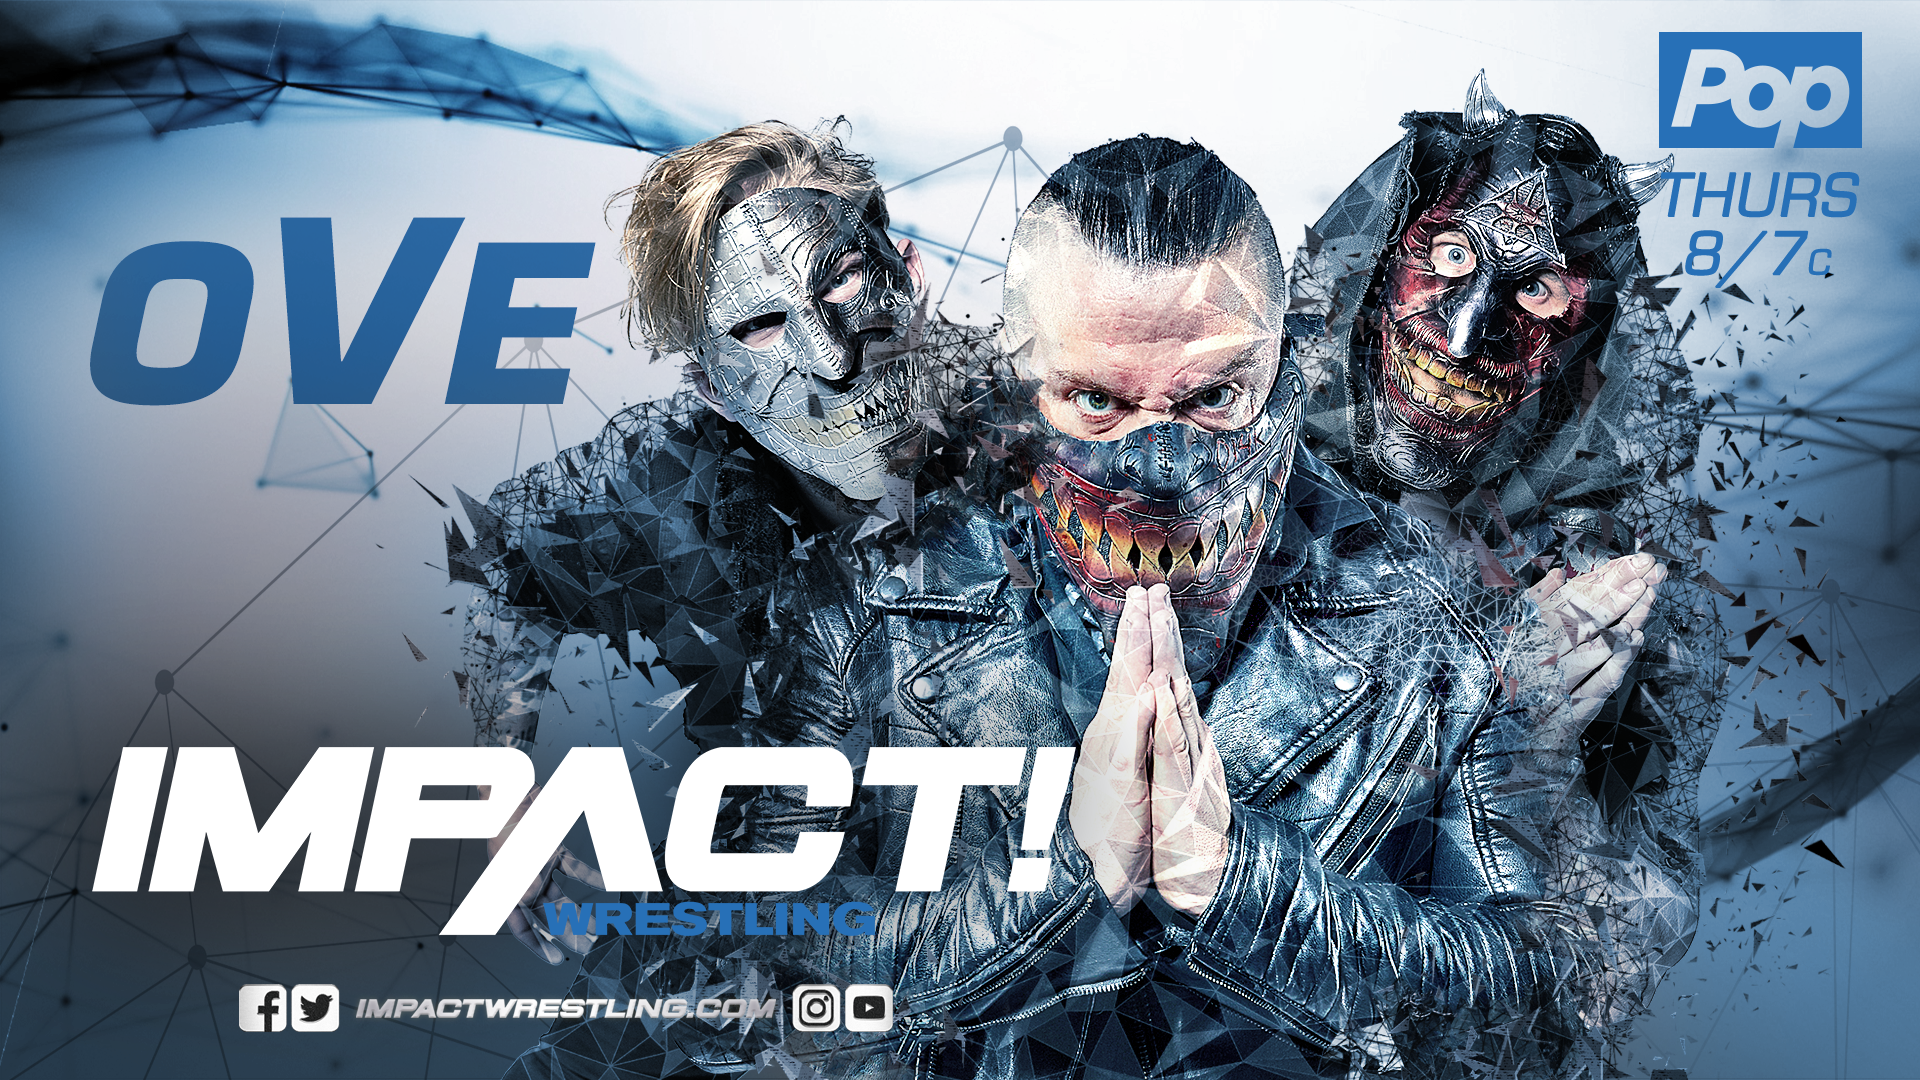 Two Major Cross-Promotion Matches Featuring Impact Wrestling Stars To Take Place In The UK During Wrestling MediaCon